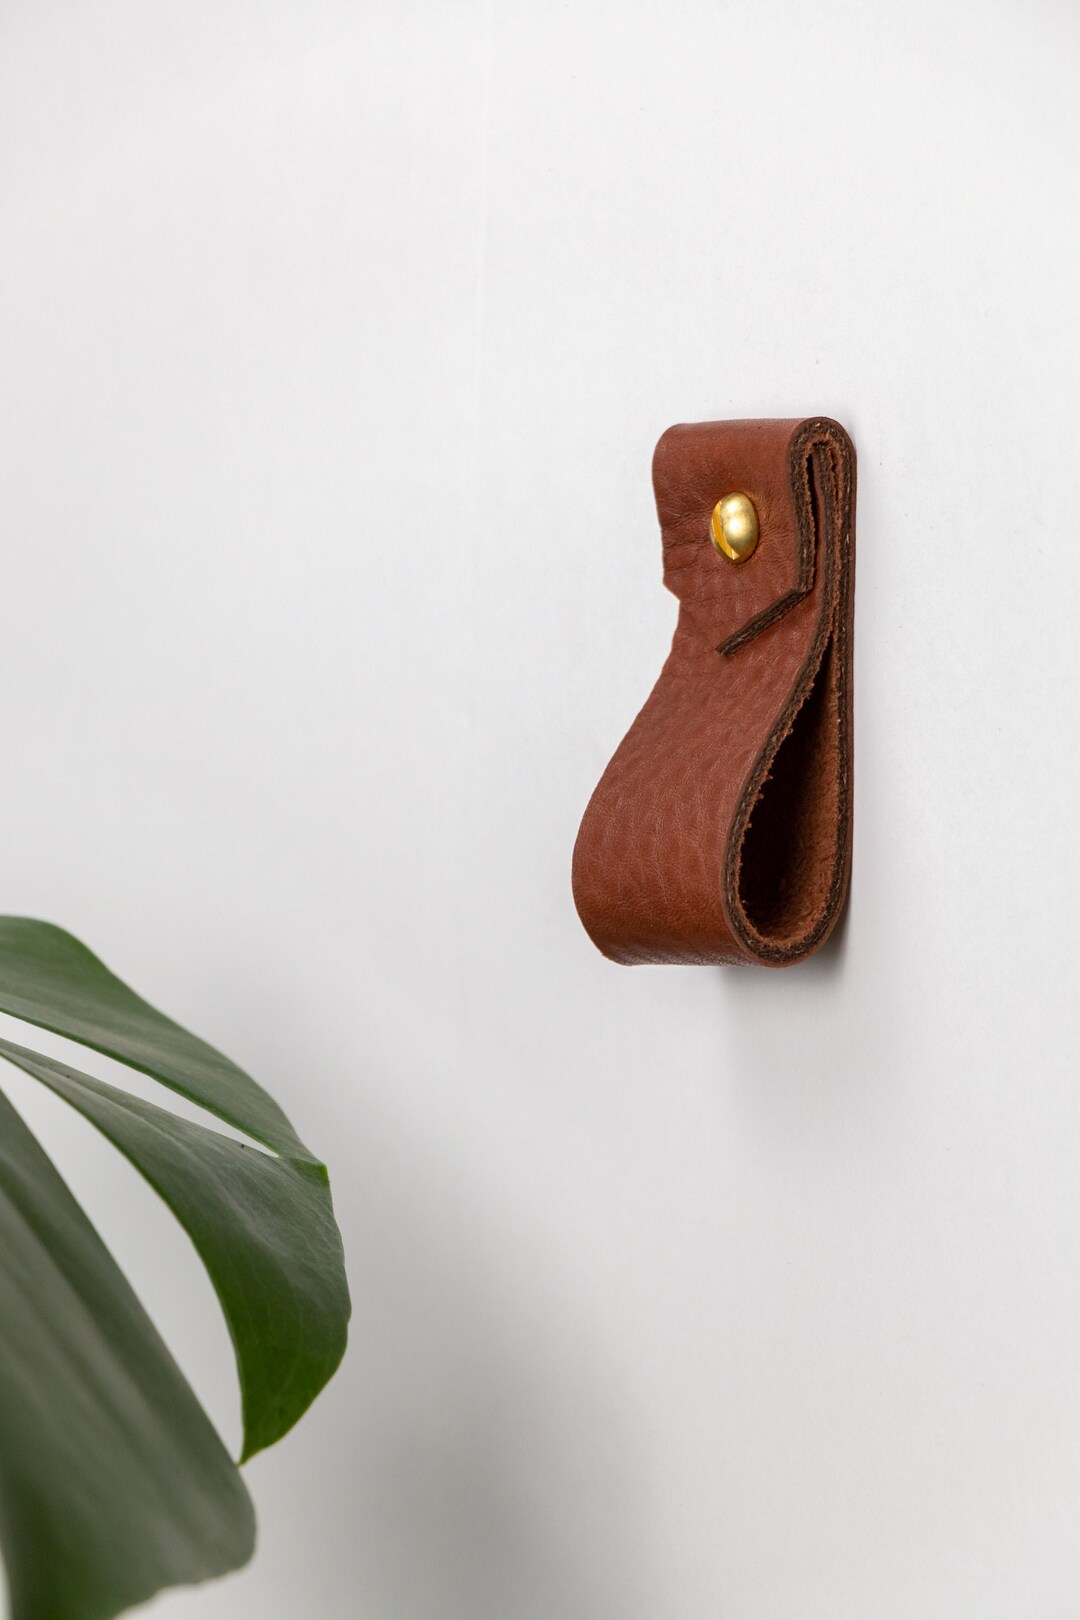 Small Leather Wall Hanging Strap Towel Hook for Wall Leather Loop